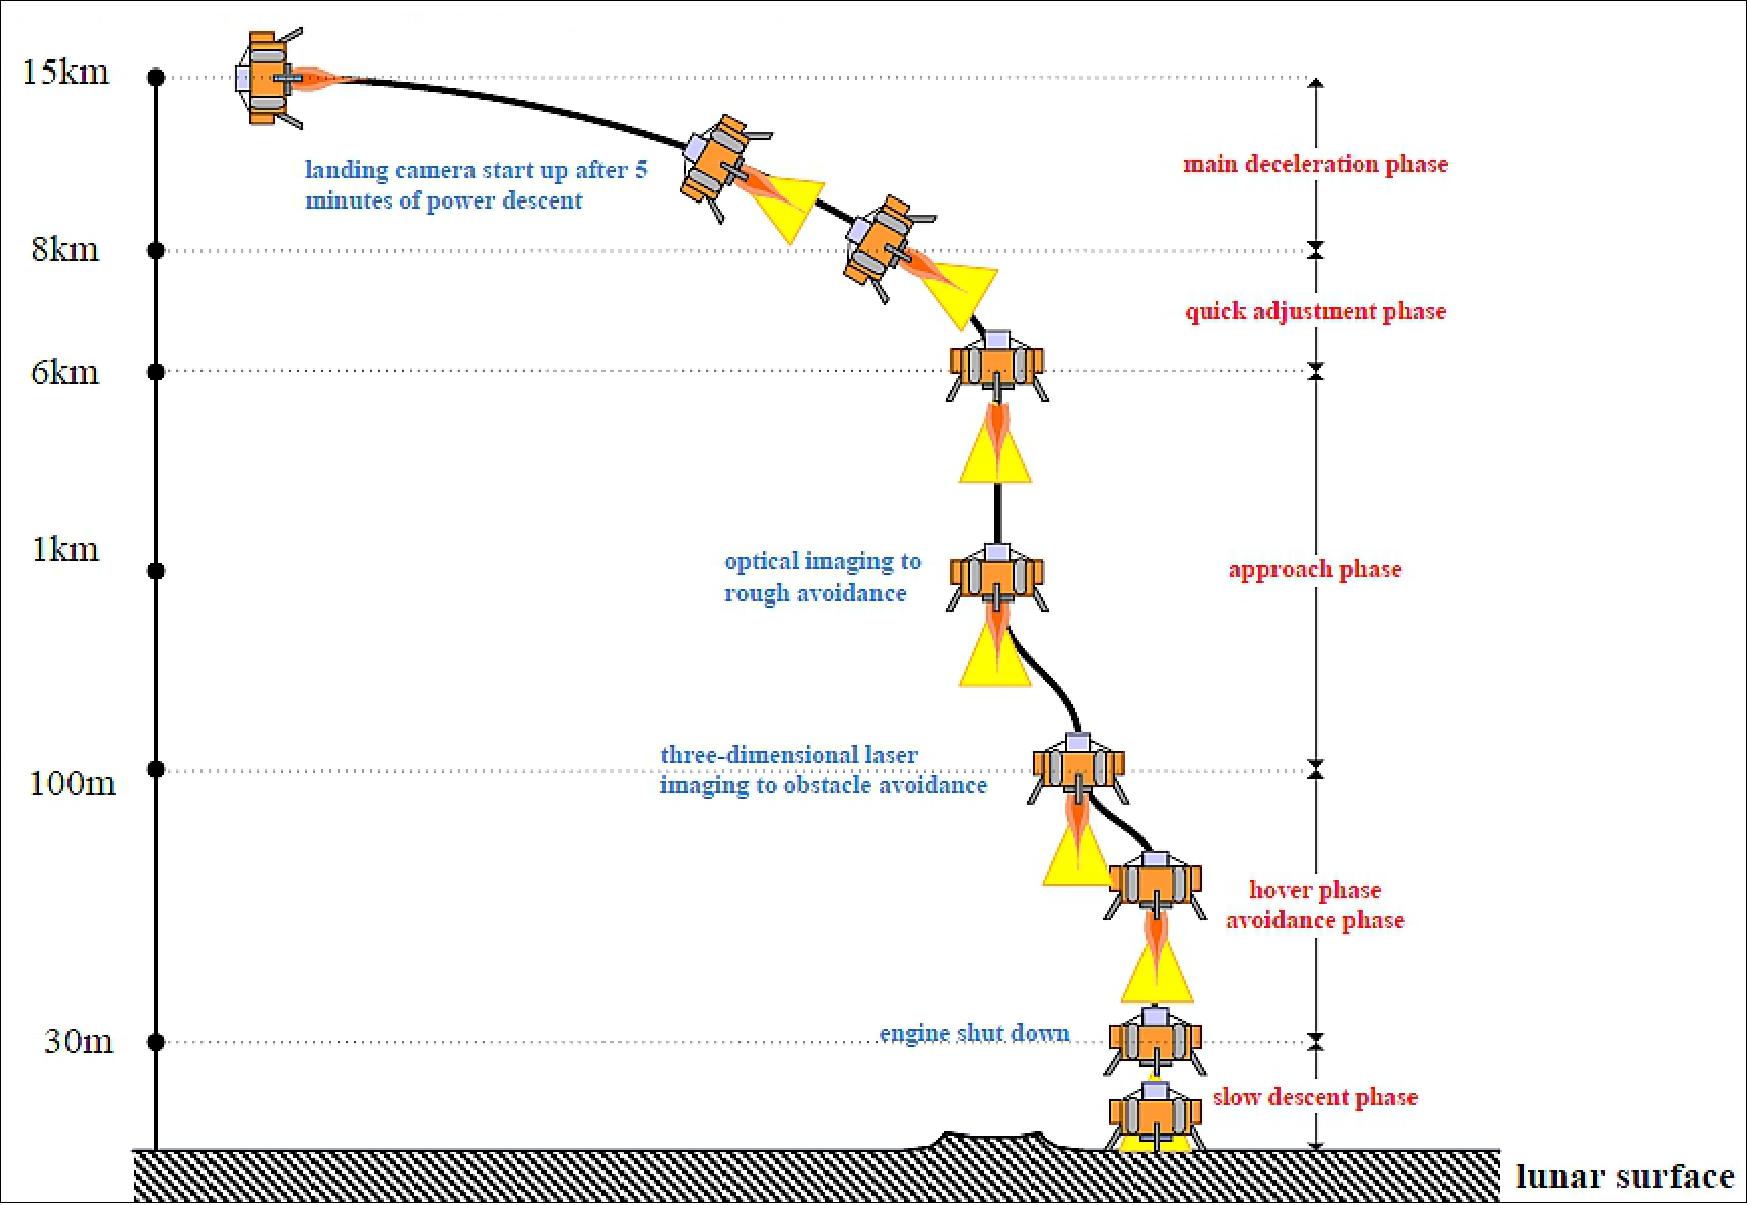 Figure 11: Planned power descent sequence of Chang'e-4 (image credit: Beijing Aerospace Control Center)